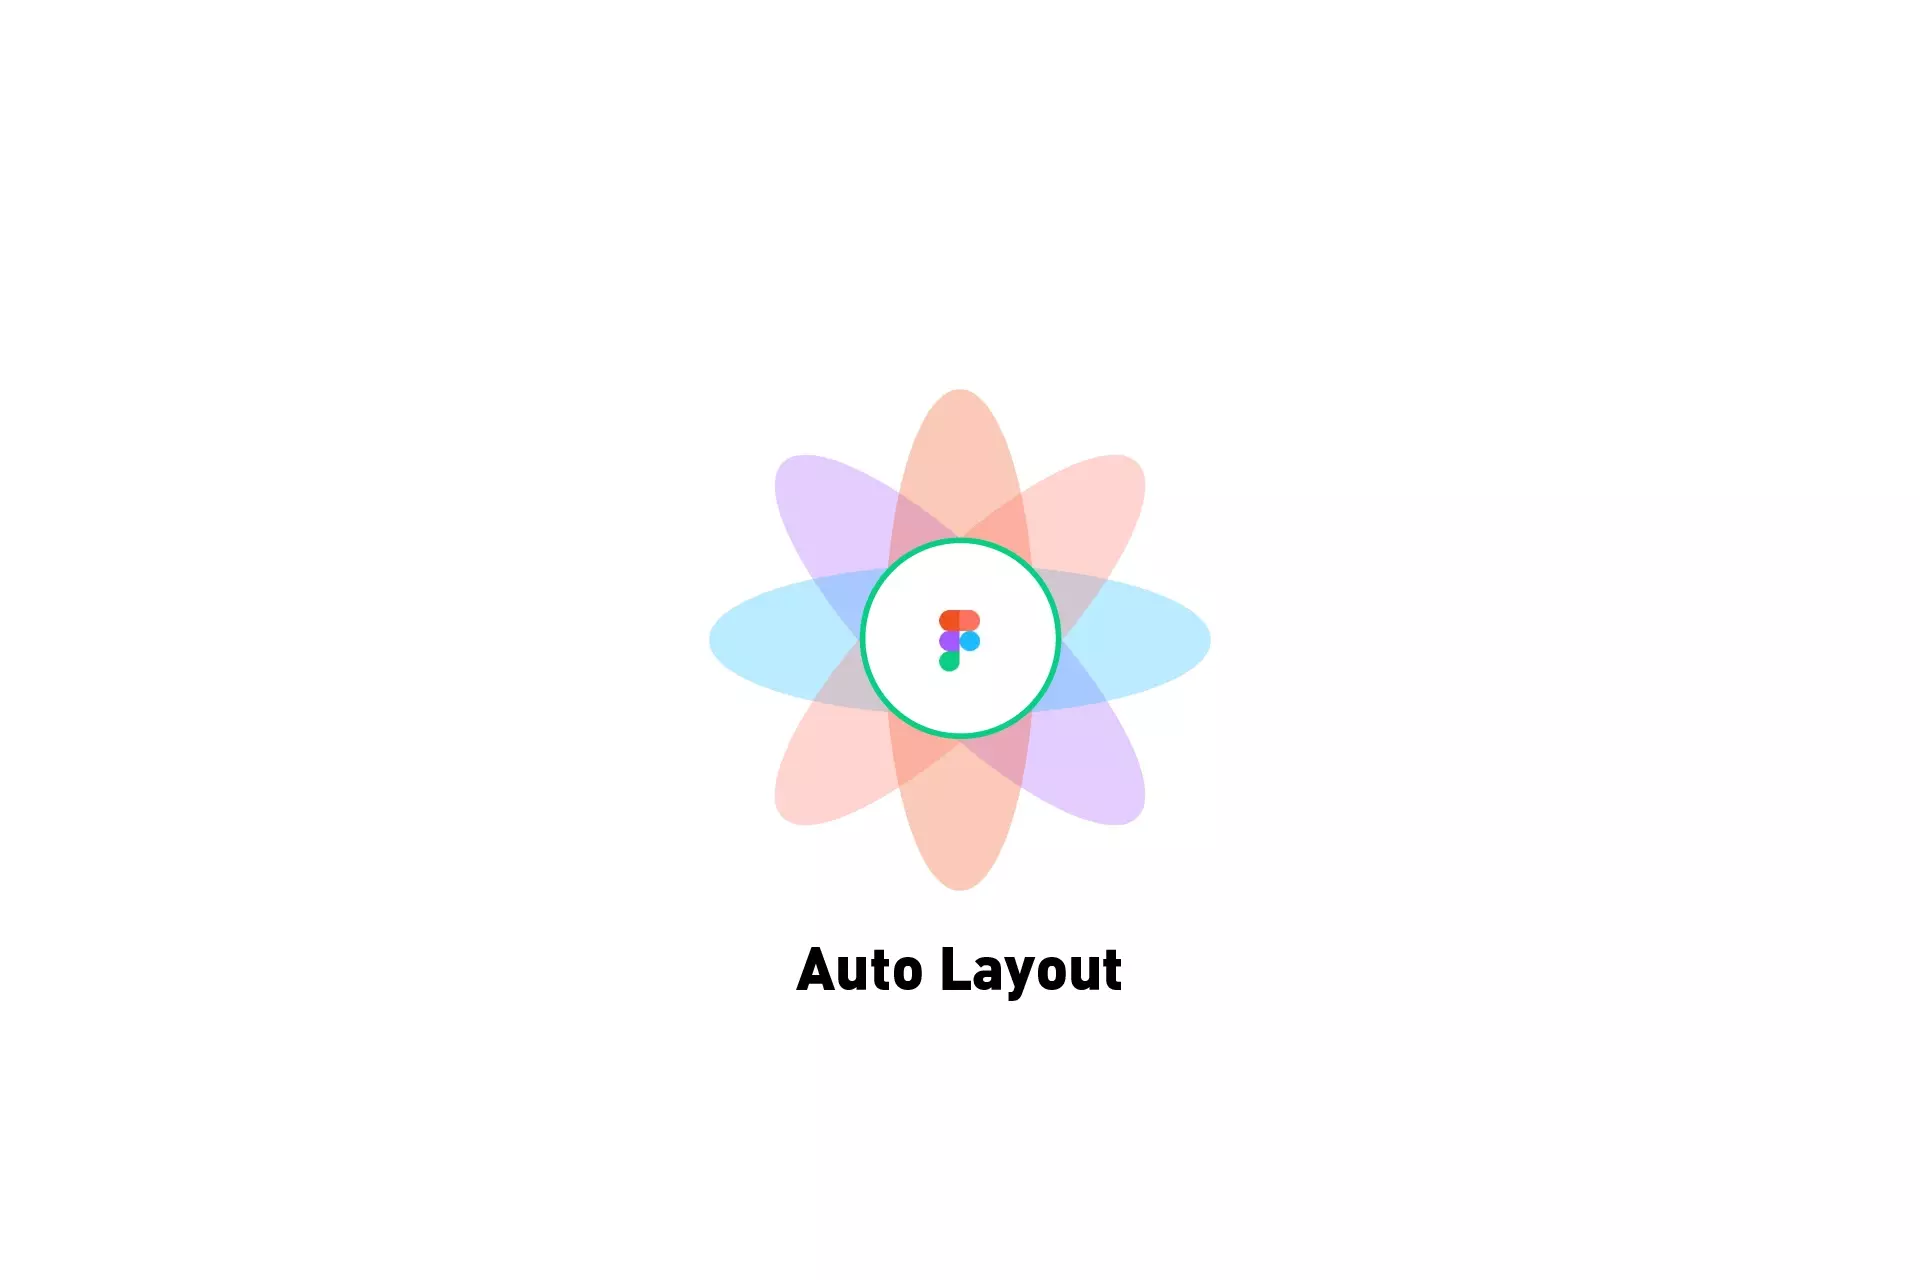 A flower that represents Figma with the text "Auto Layout" beneath it.